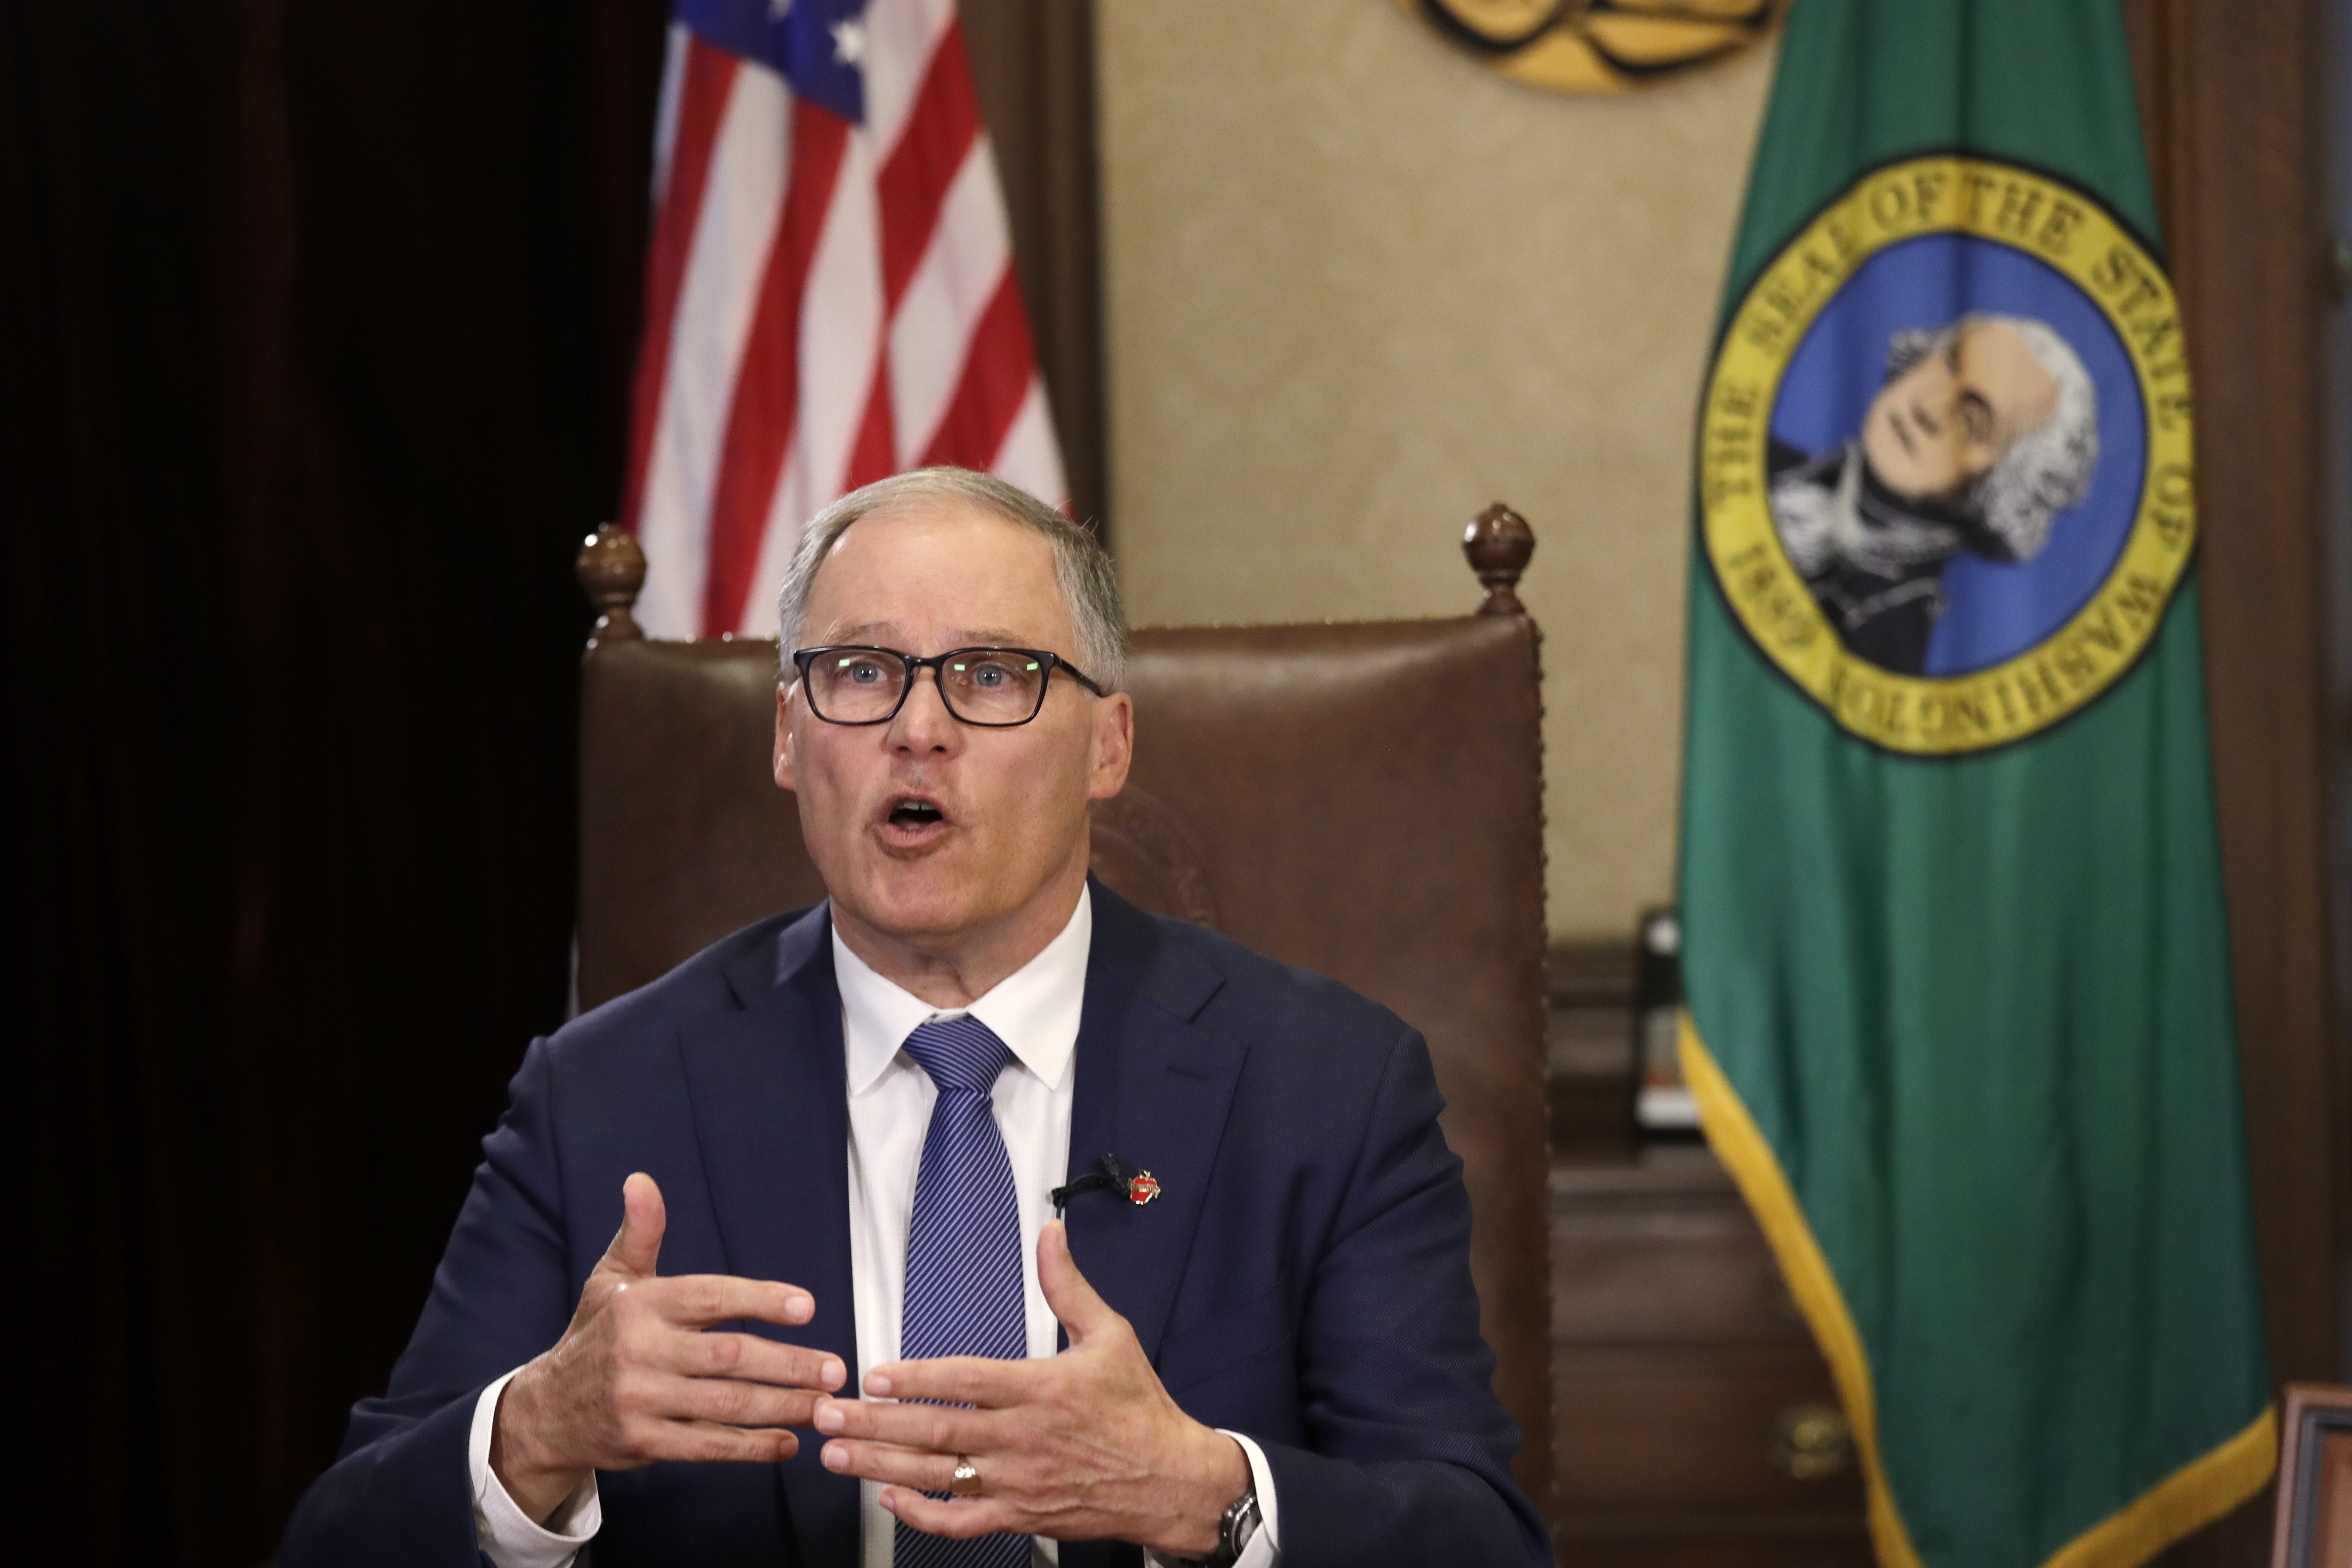 Washington Gov. Jay Inslee prepares to speak about additional plans to slow the spread of coronavirus before a televised address from his office in Olympia, Washington, on March 23.